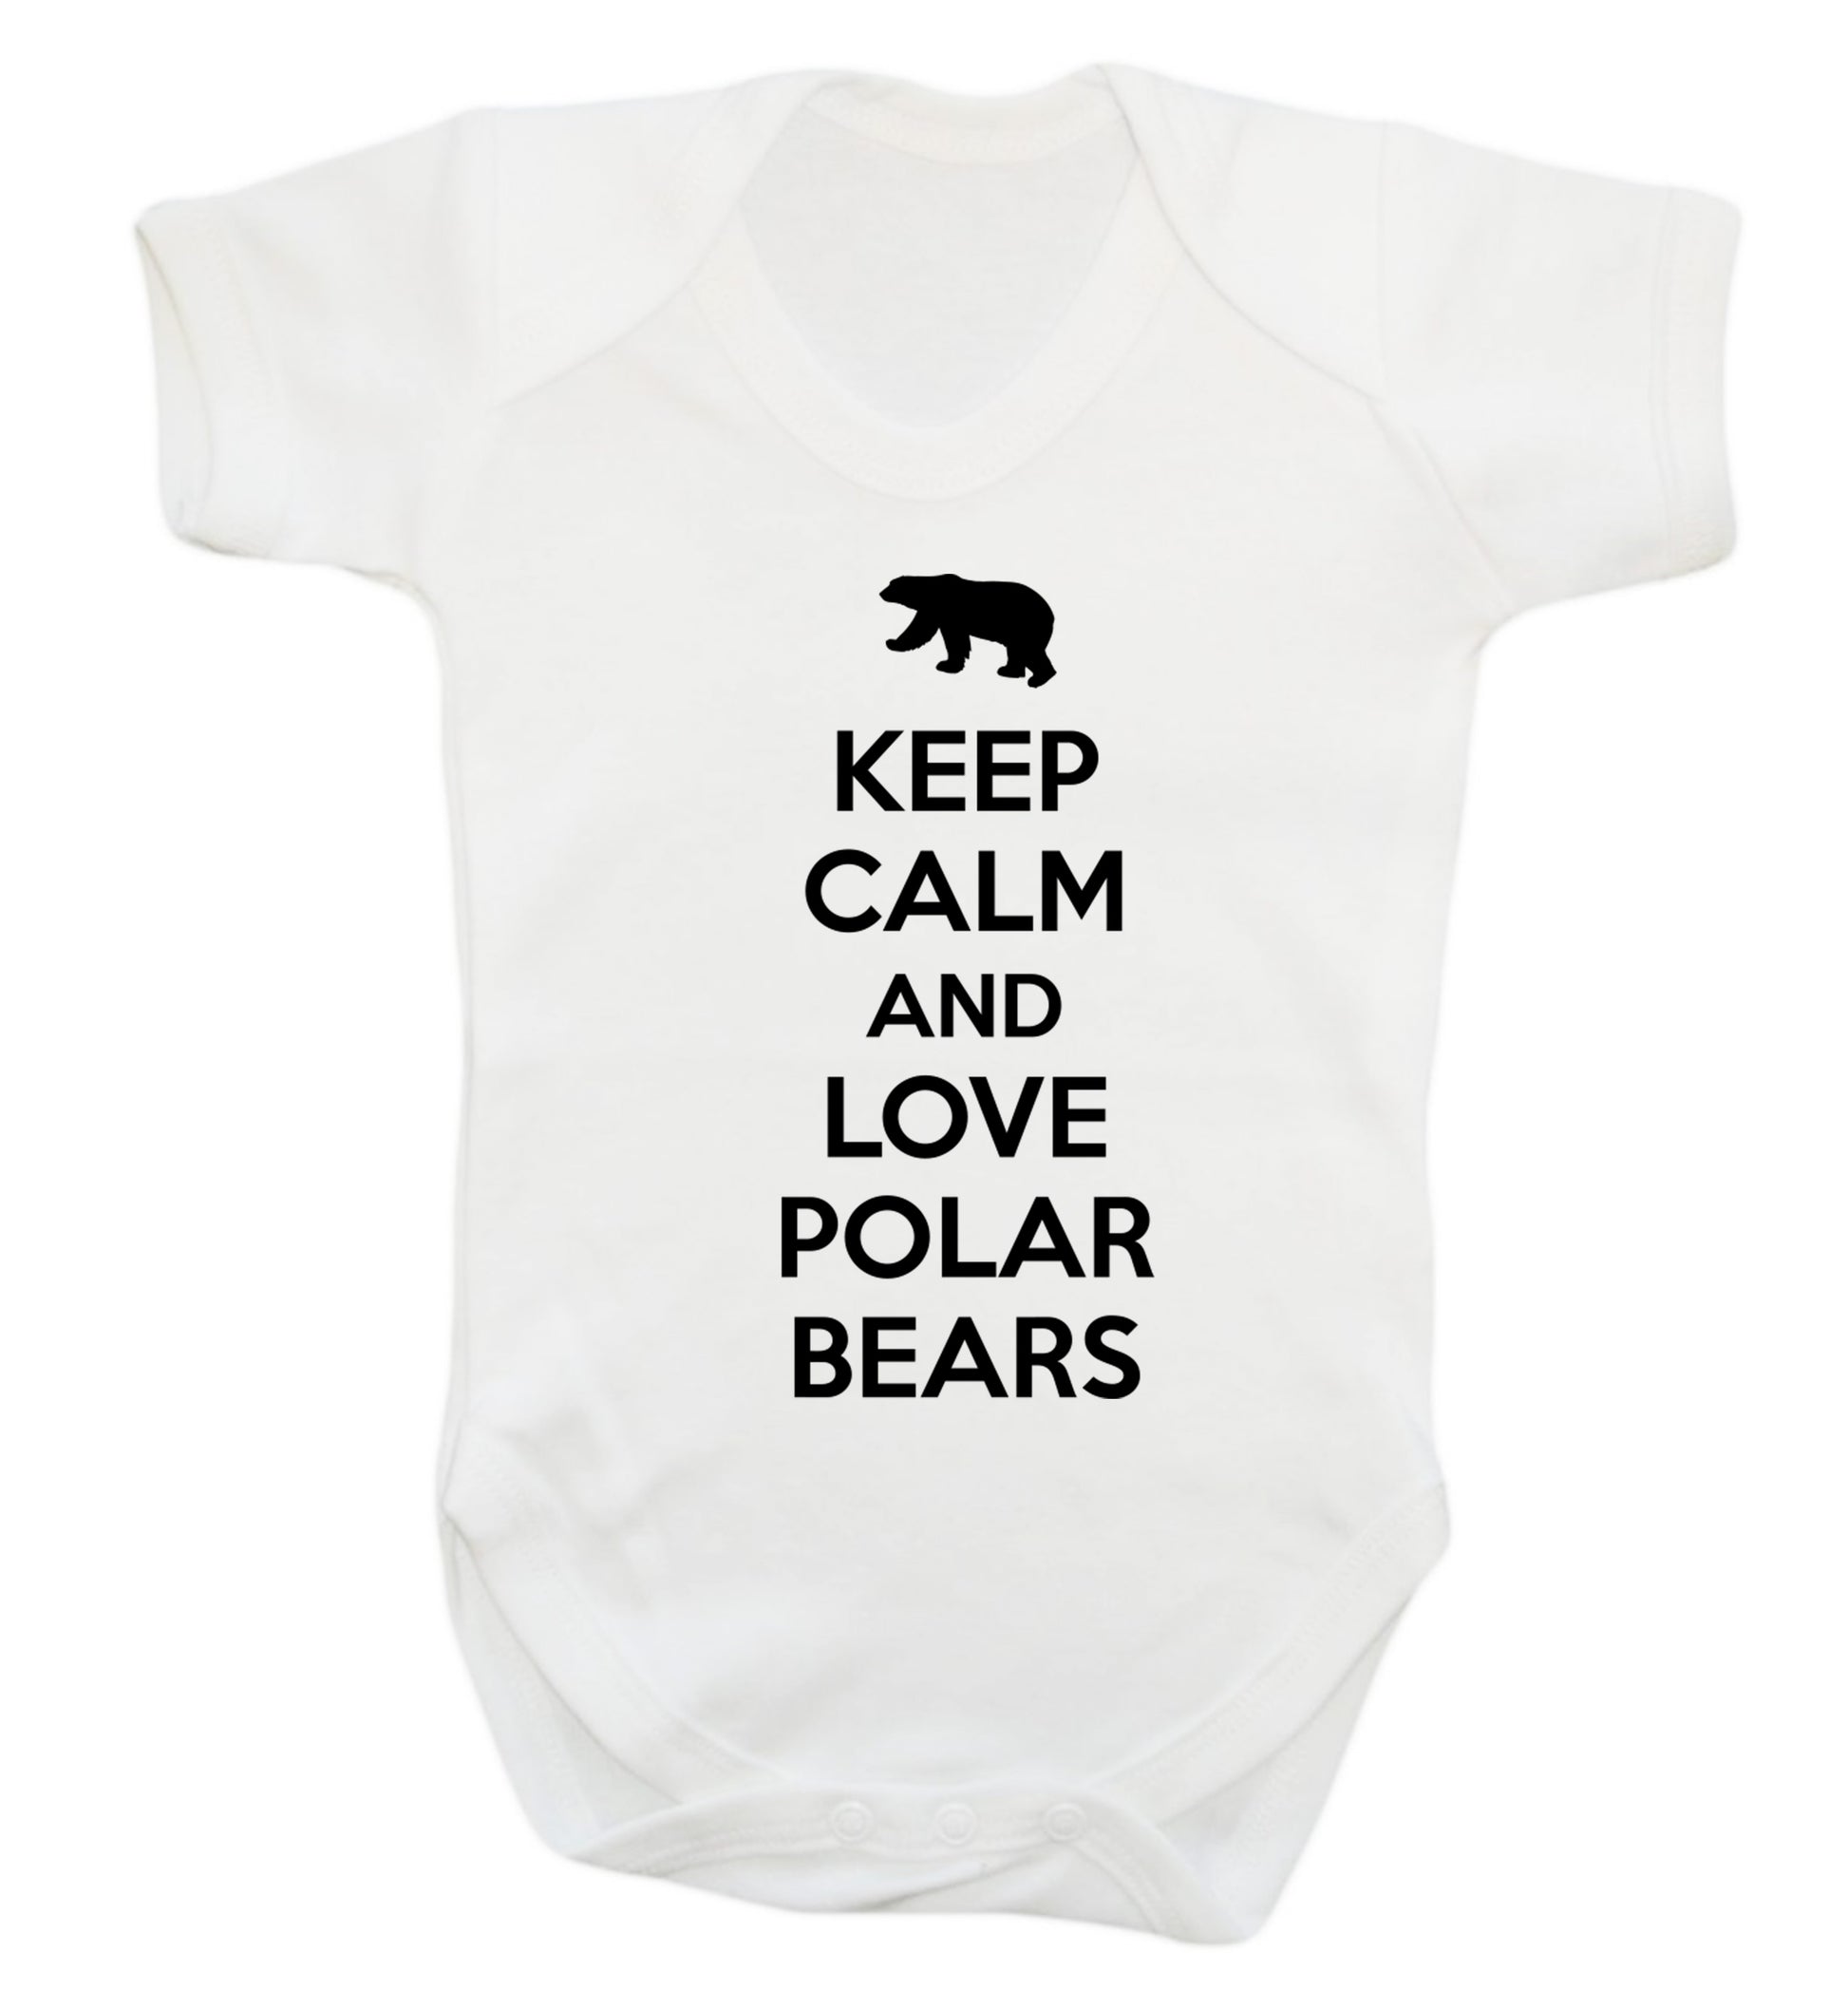 Keep calm and love polar bears Baby Vest white 18-24 months